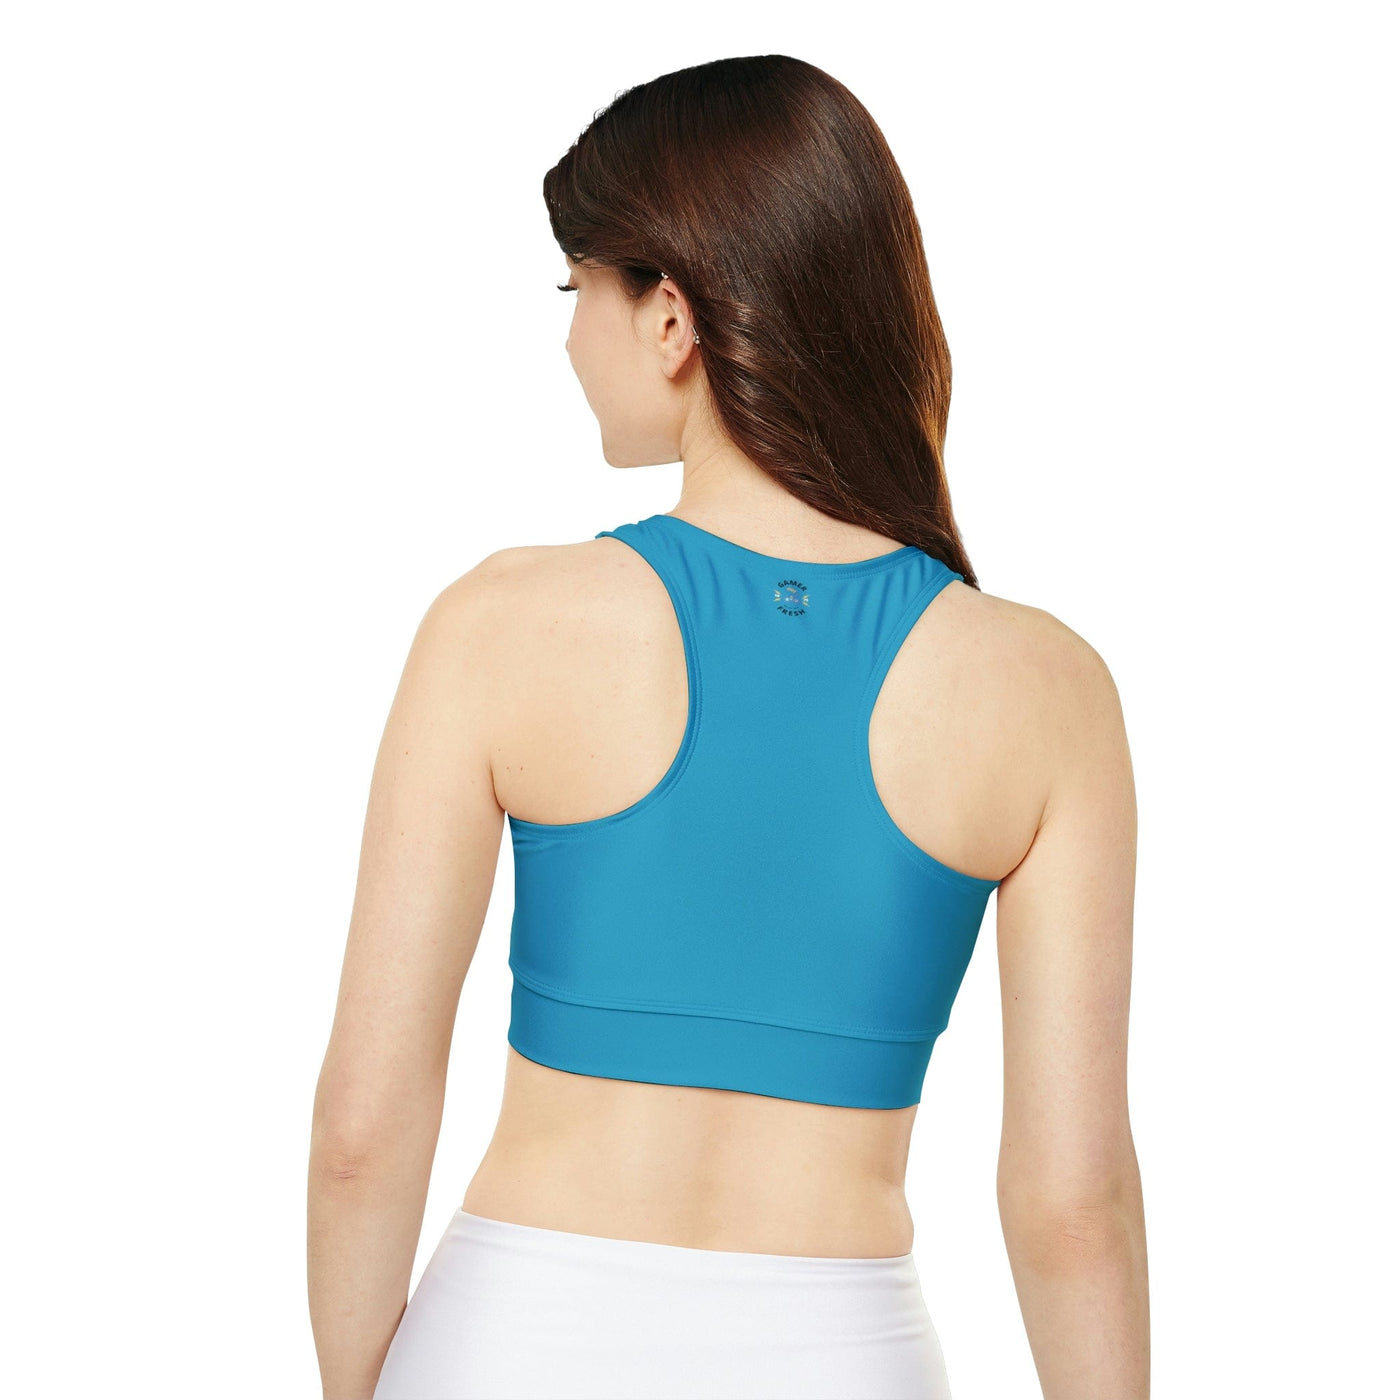 Gamer Fresh Limited Edition | Qahwah Pop | Fully Lined Padded Ladies Turquoise Sports Bra